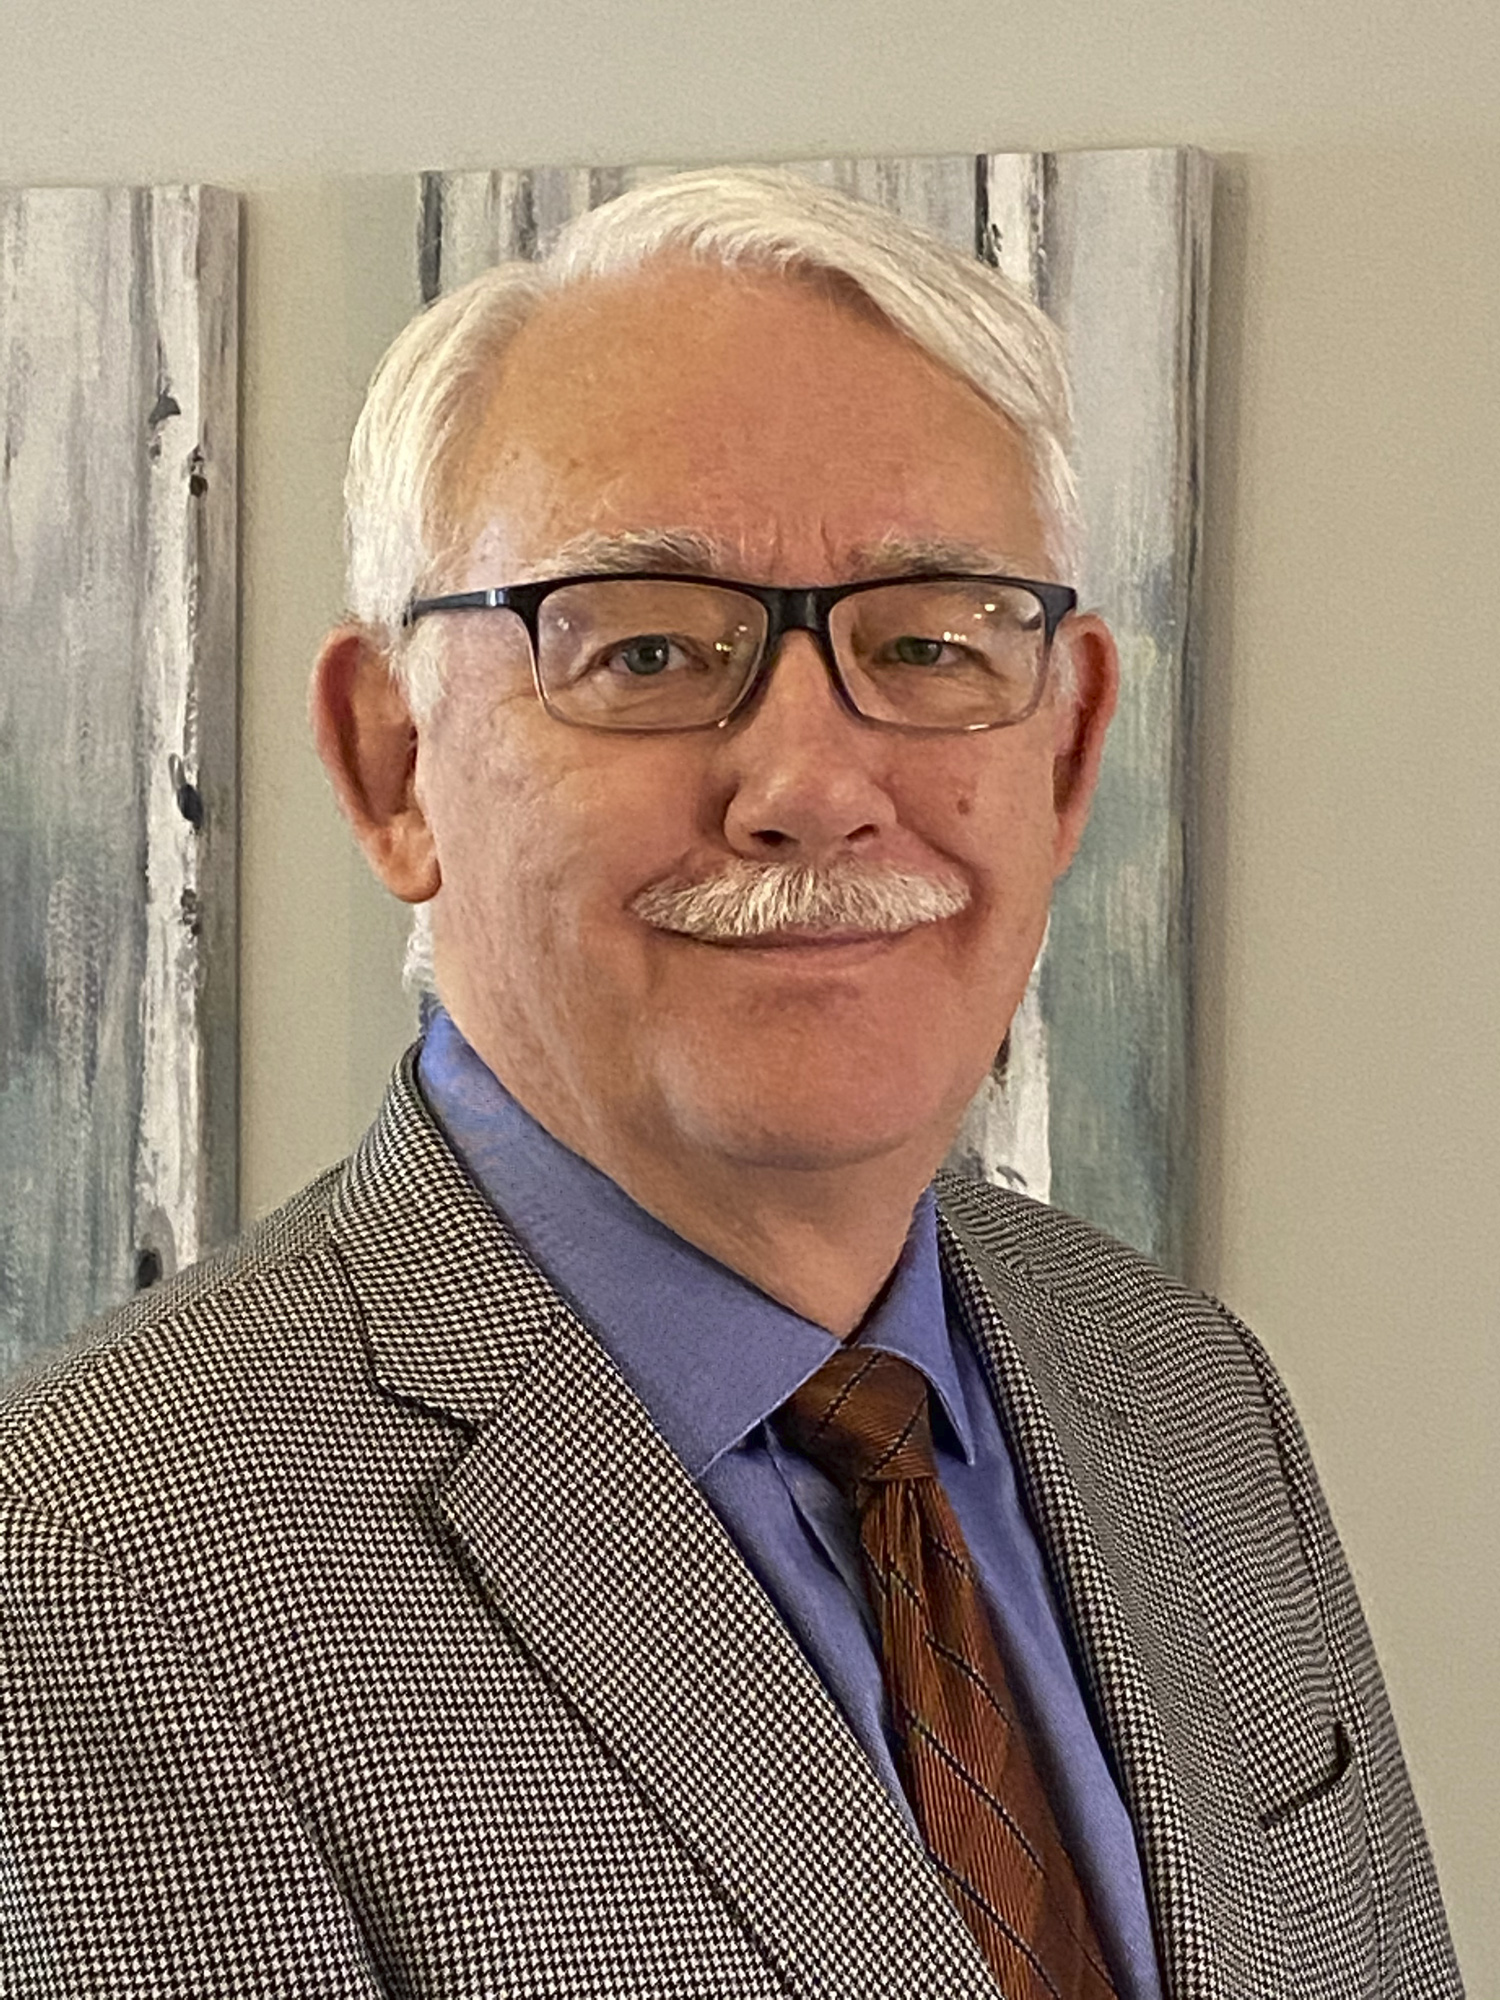 Gary Bosgoed earned his degree in Industrial Systems Engineering in 1983. He operates a consulting business in Edmonton and sits on the University's Board of Governors.